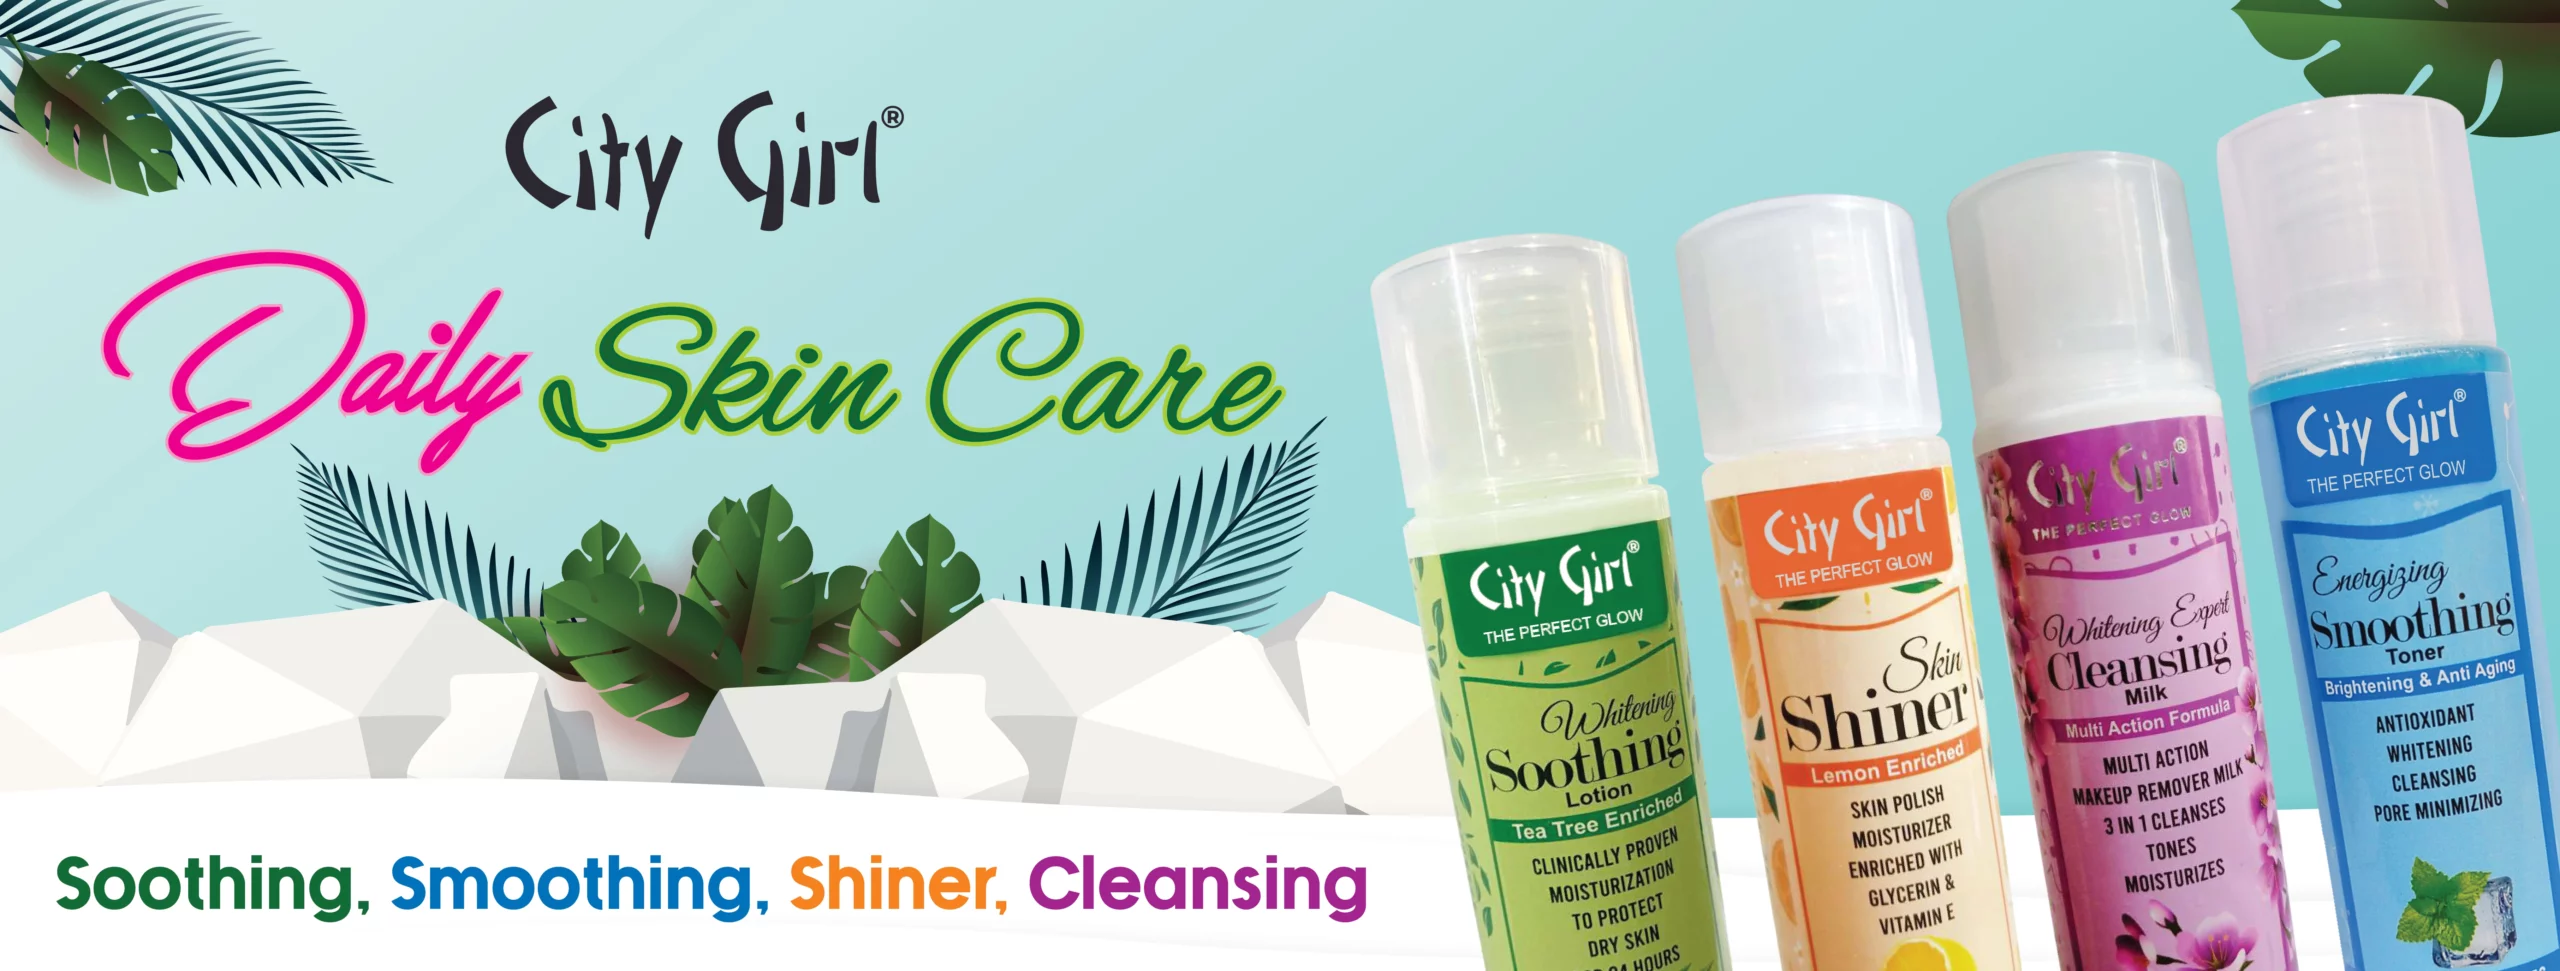 City Girl Soothing Lotion, Smoothing, Cleansing Milk, Face Shinner